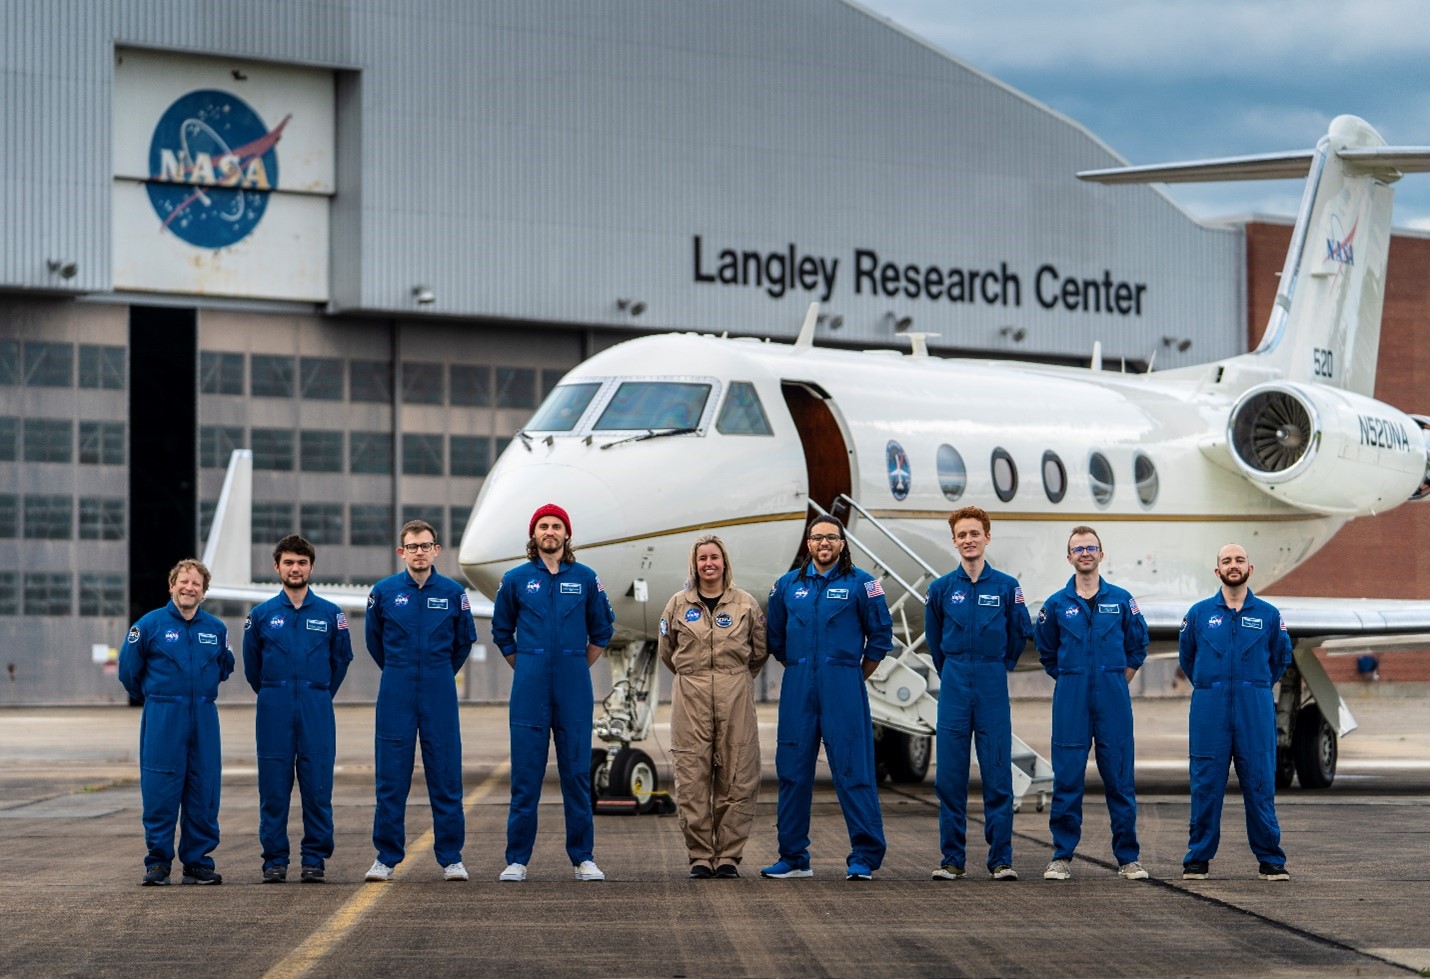 The KiNET-X crew stands in front of an aircraft at the Langle Research Center hangar.